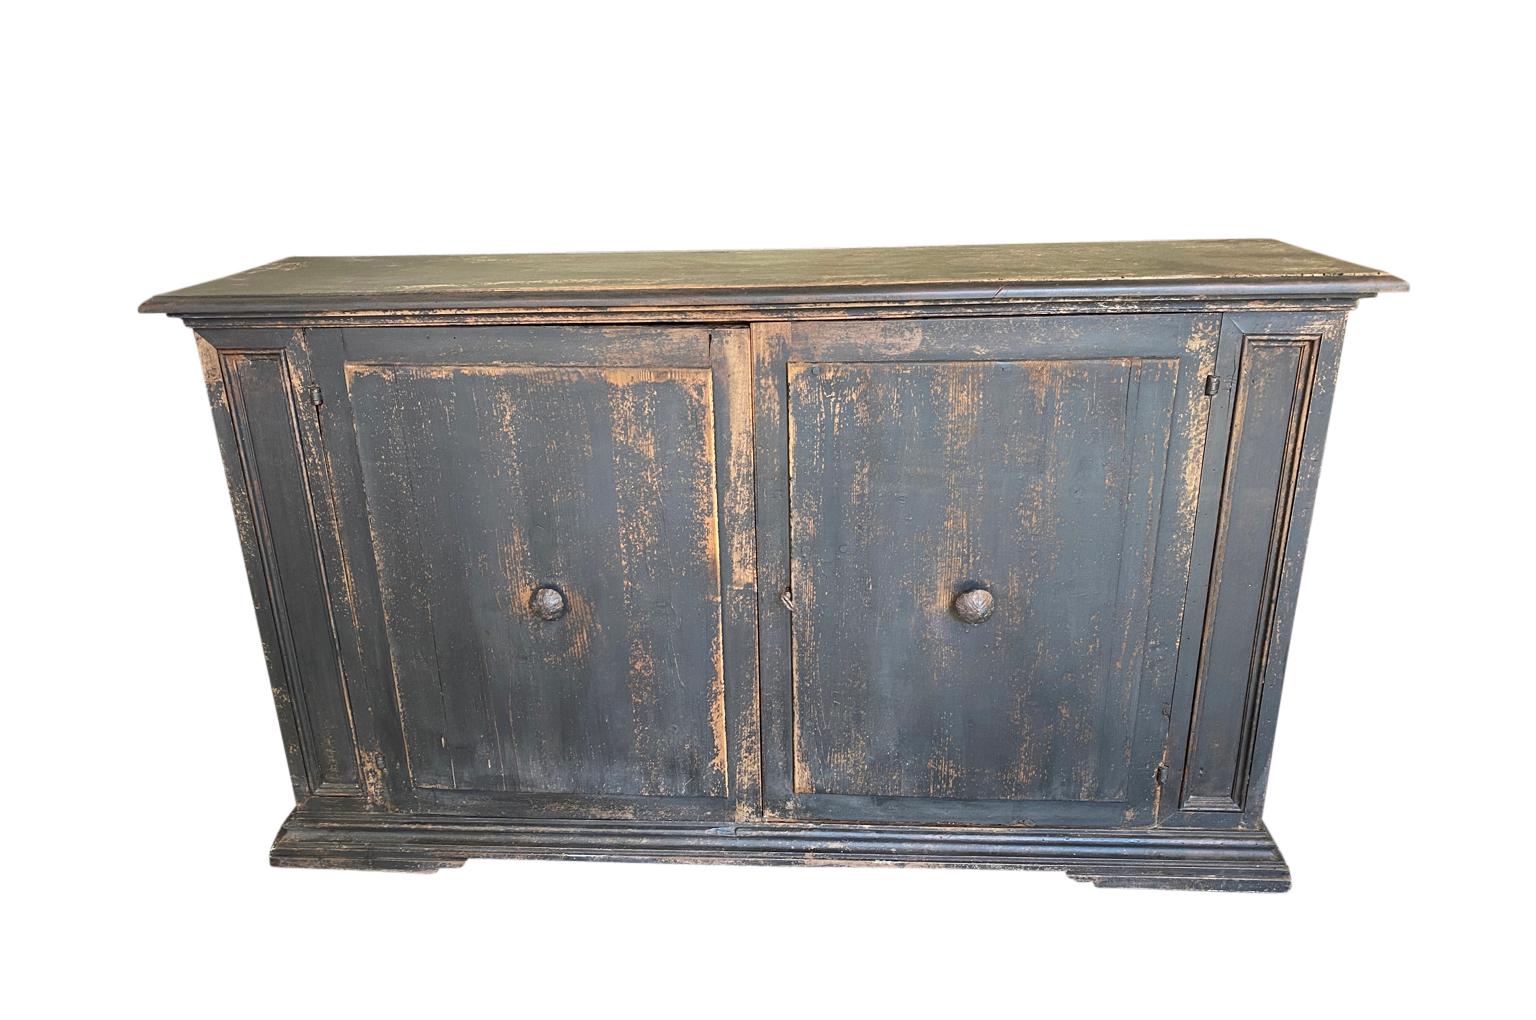 A very handsome 2 door 18th century credenza from Northern Italy. Soundly constructed from painted walnut and pine. Wonderful finish and patina. Excellent narrow depth.